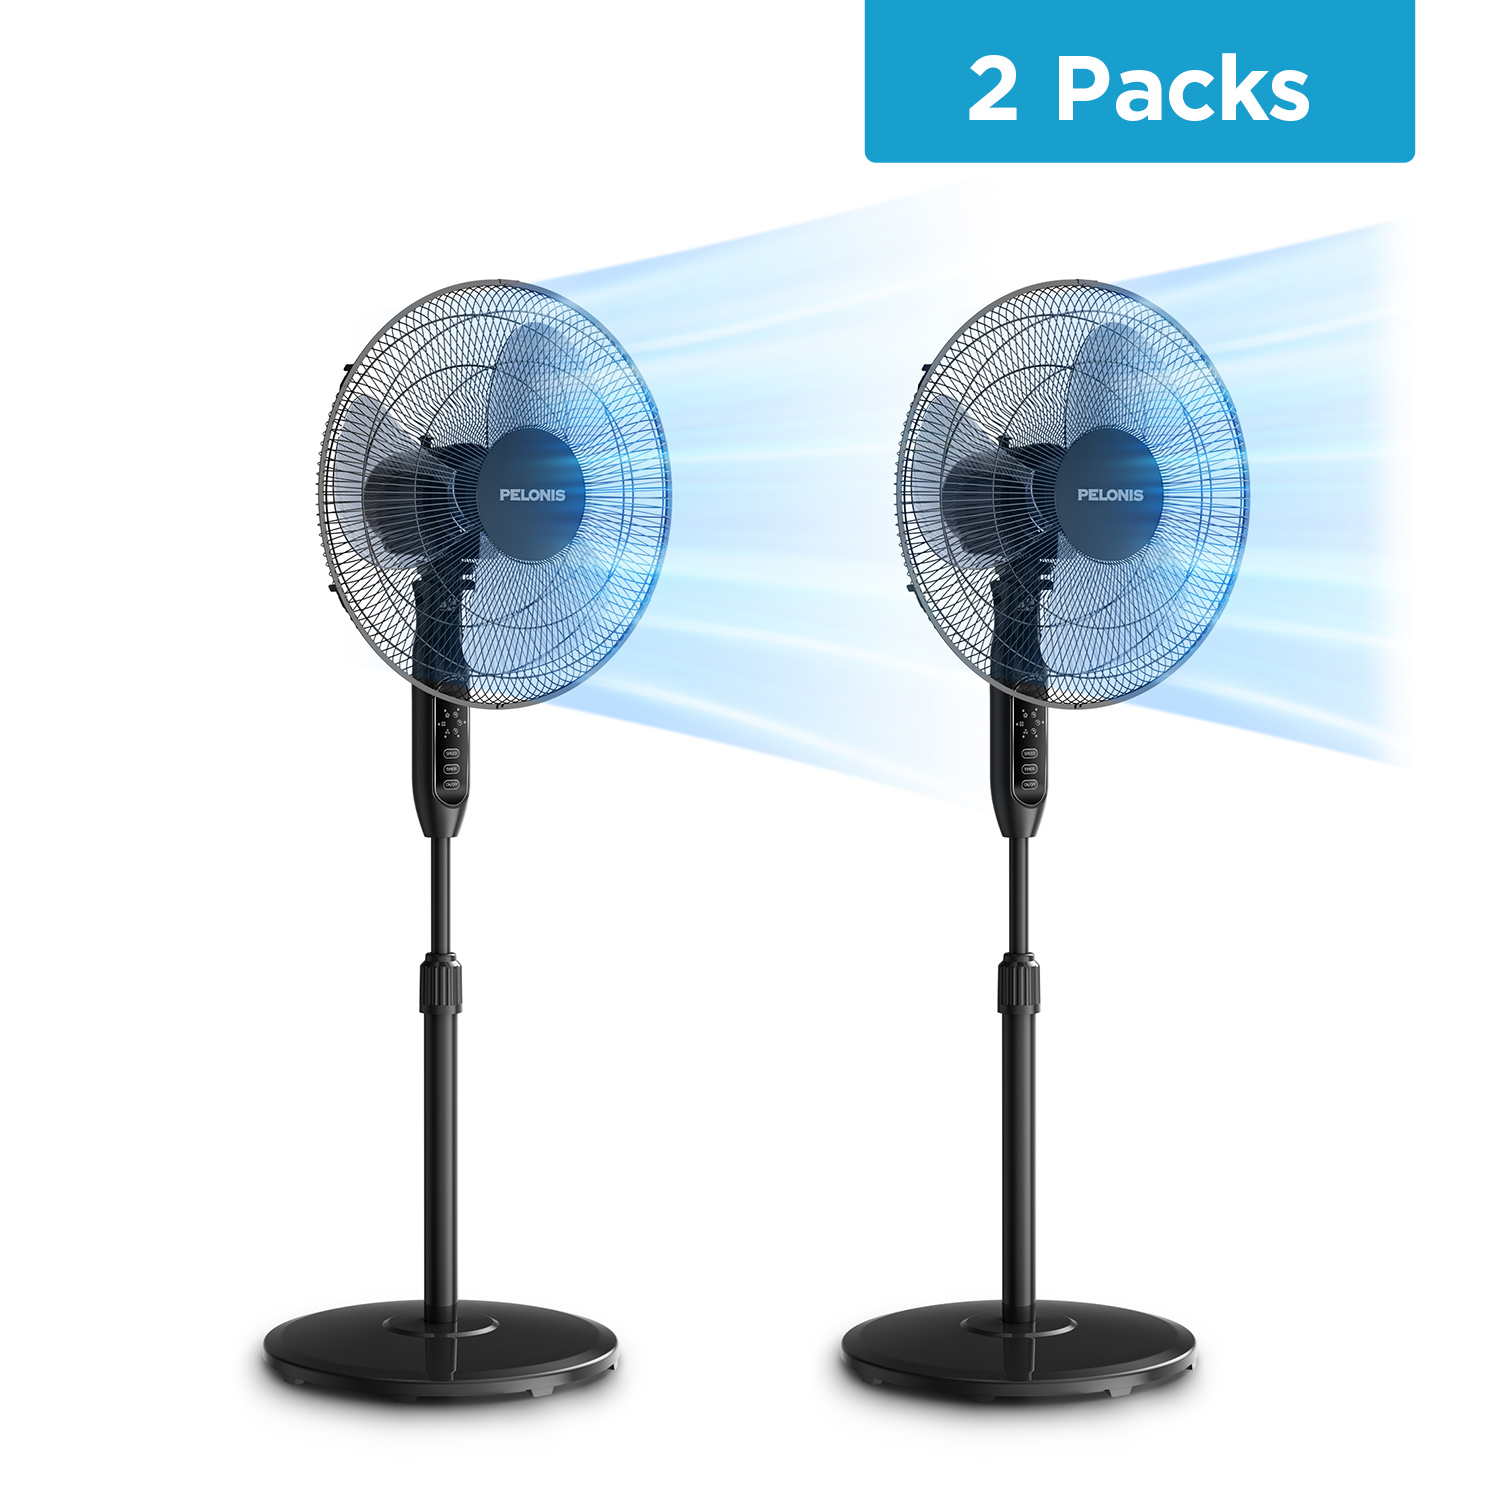 

16-inch Pedestal Standing Fan With Remote For Bedroom, Home And Office, 2 Packs, 3 Quiet Speeds, 7h Timer, Height-adjustable